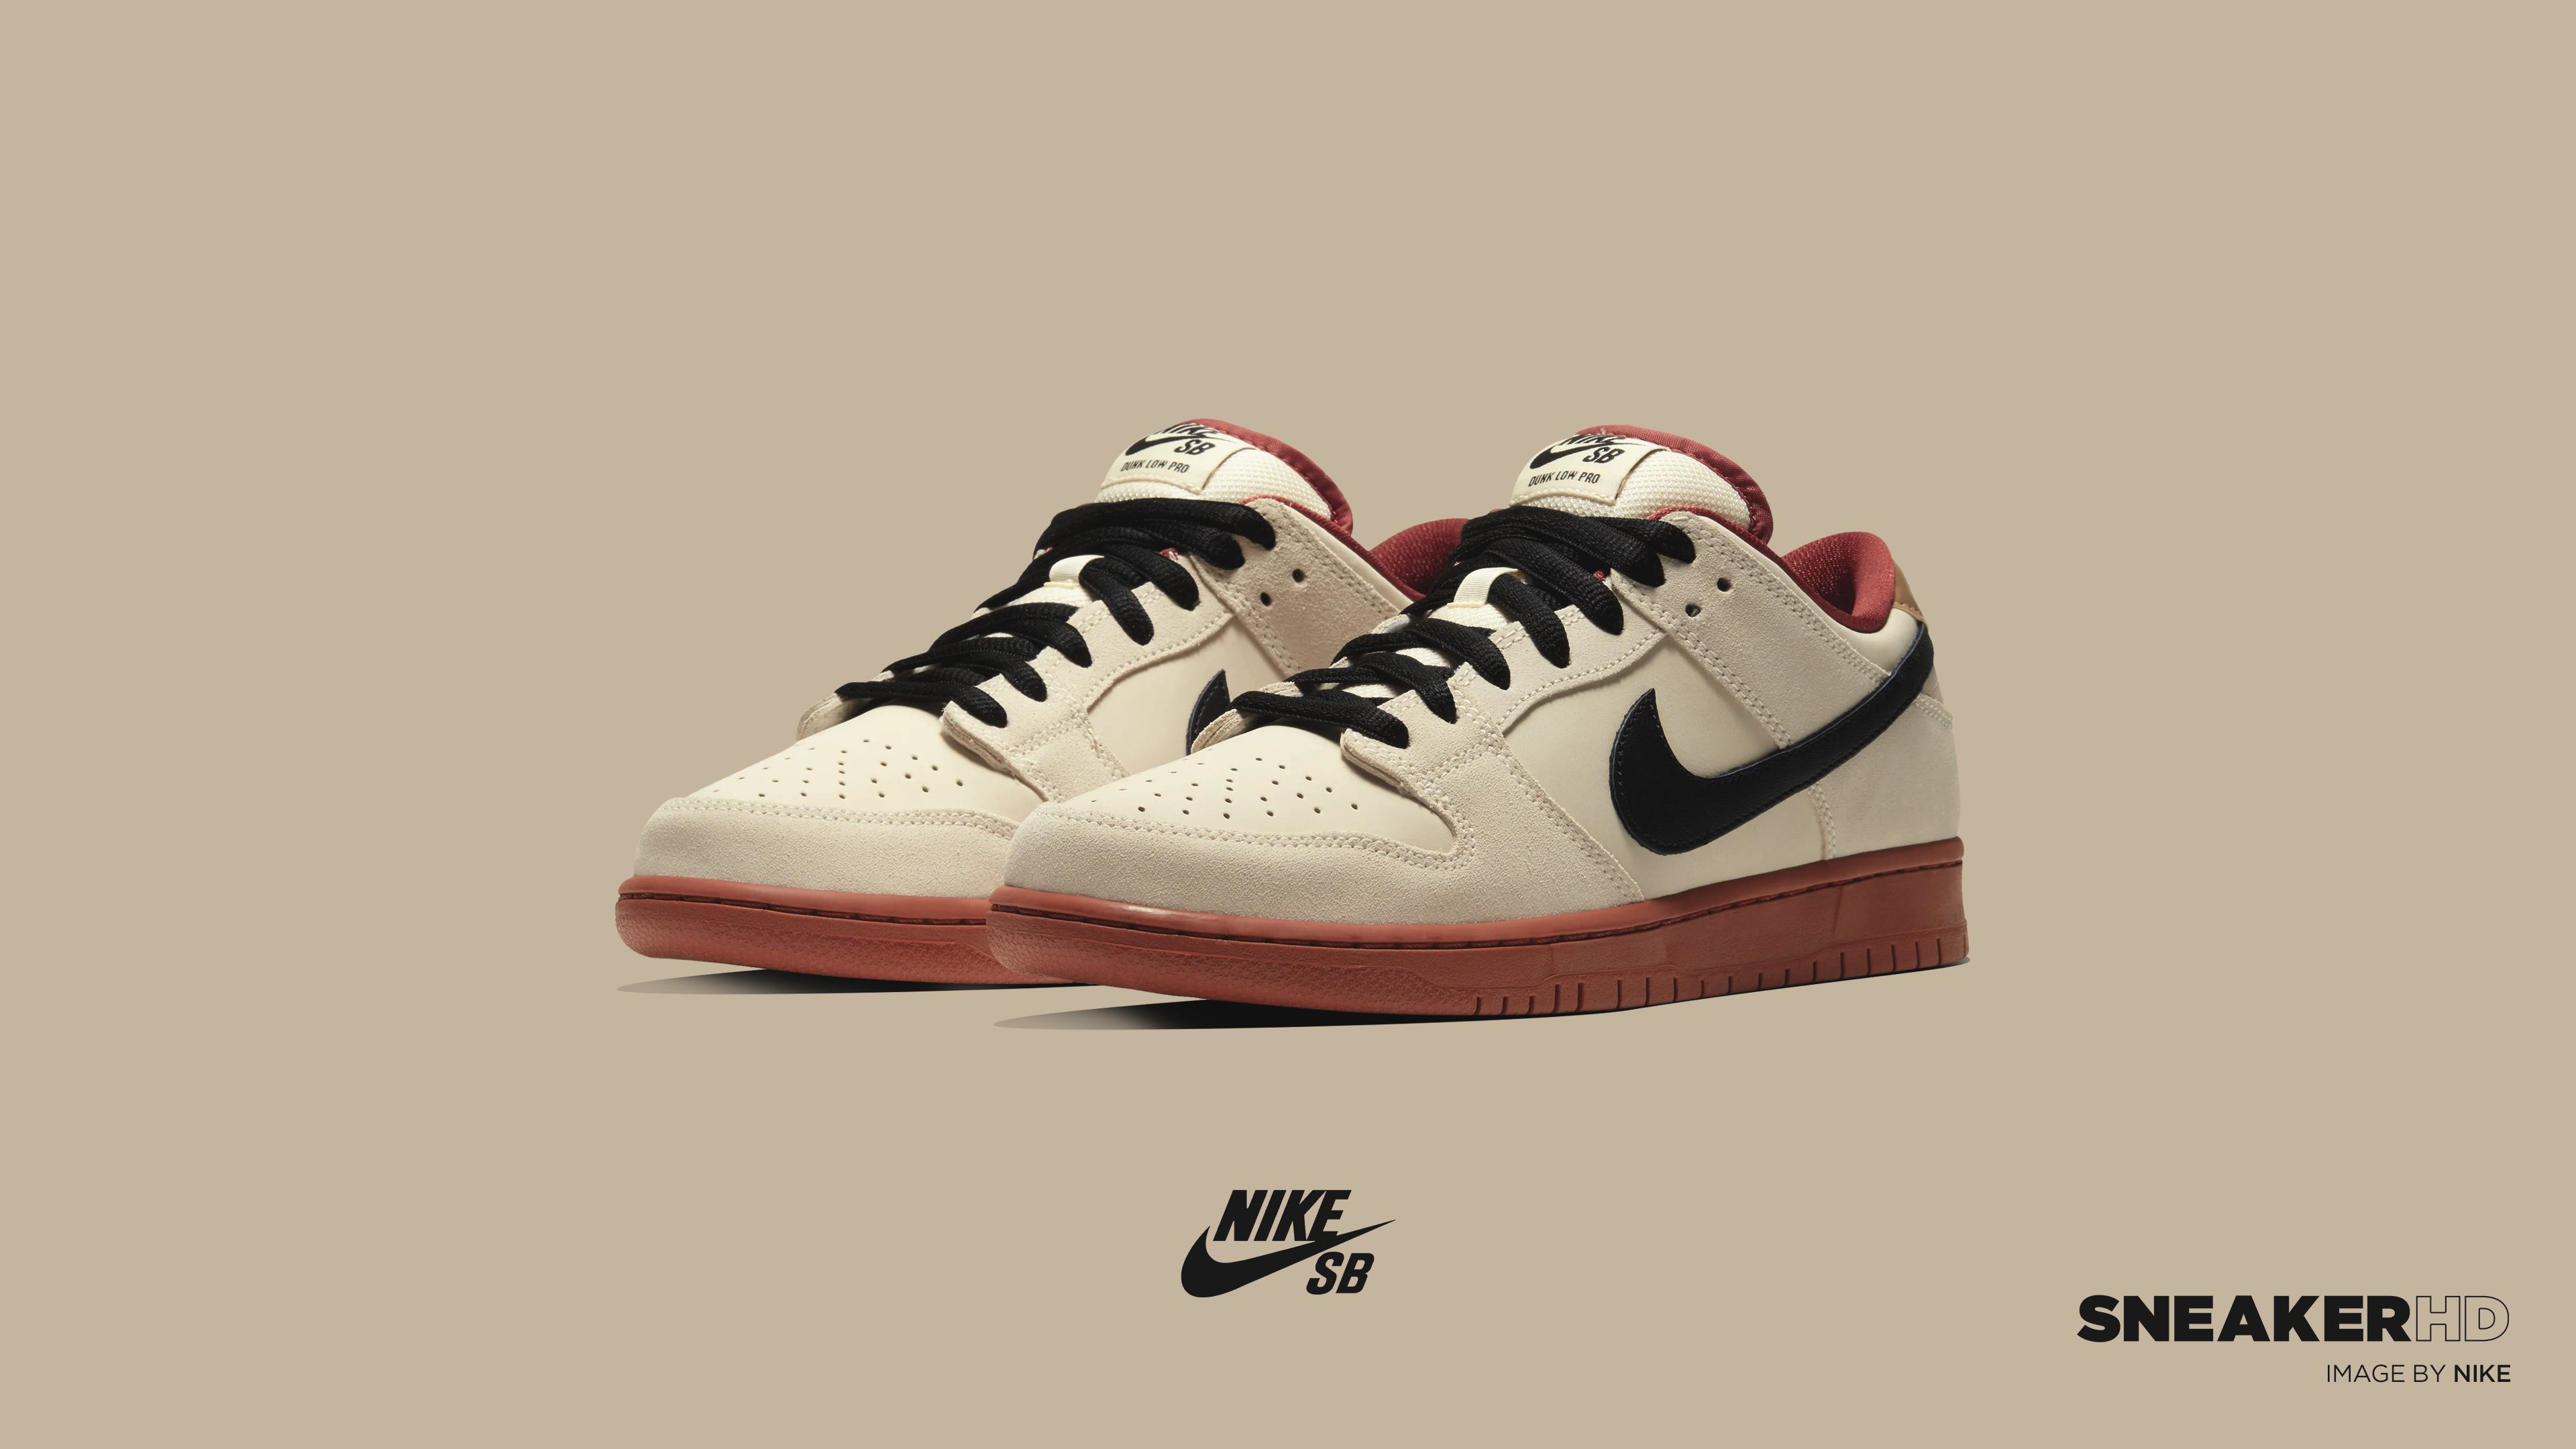  – Your favorite sneakers in 4K, Retina, Mobile and  HD wallpaper resolutions! Nike SB Dunk Archives  -  Your favorite sneakers in 4K, Retina, Mobile and HD wallpaper resolutions!